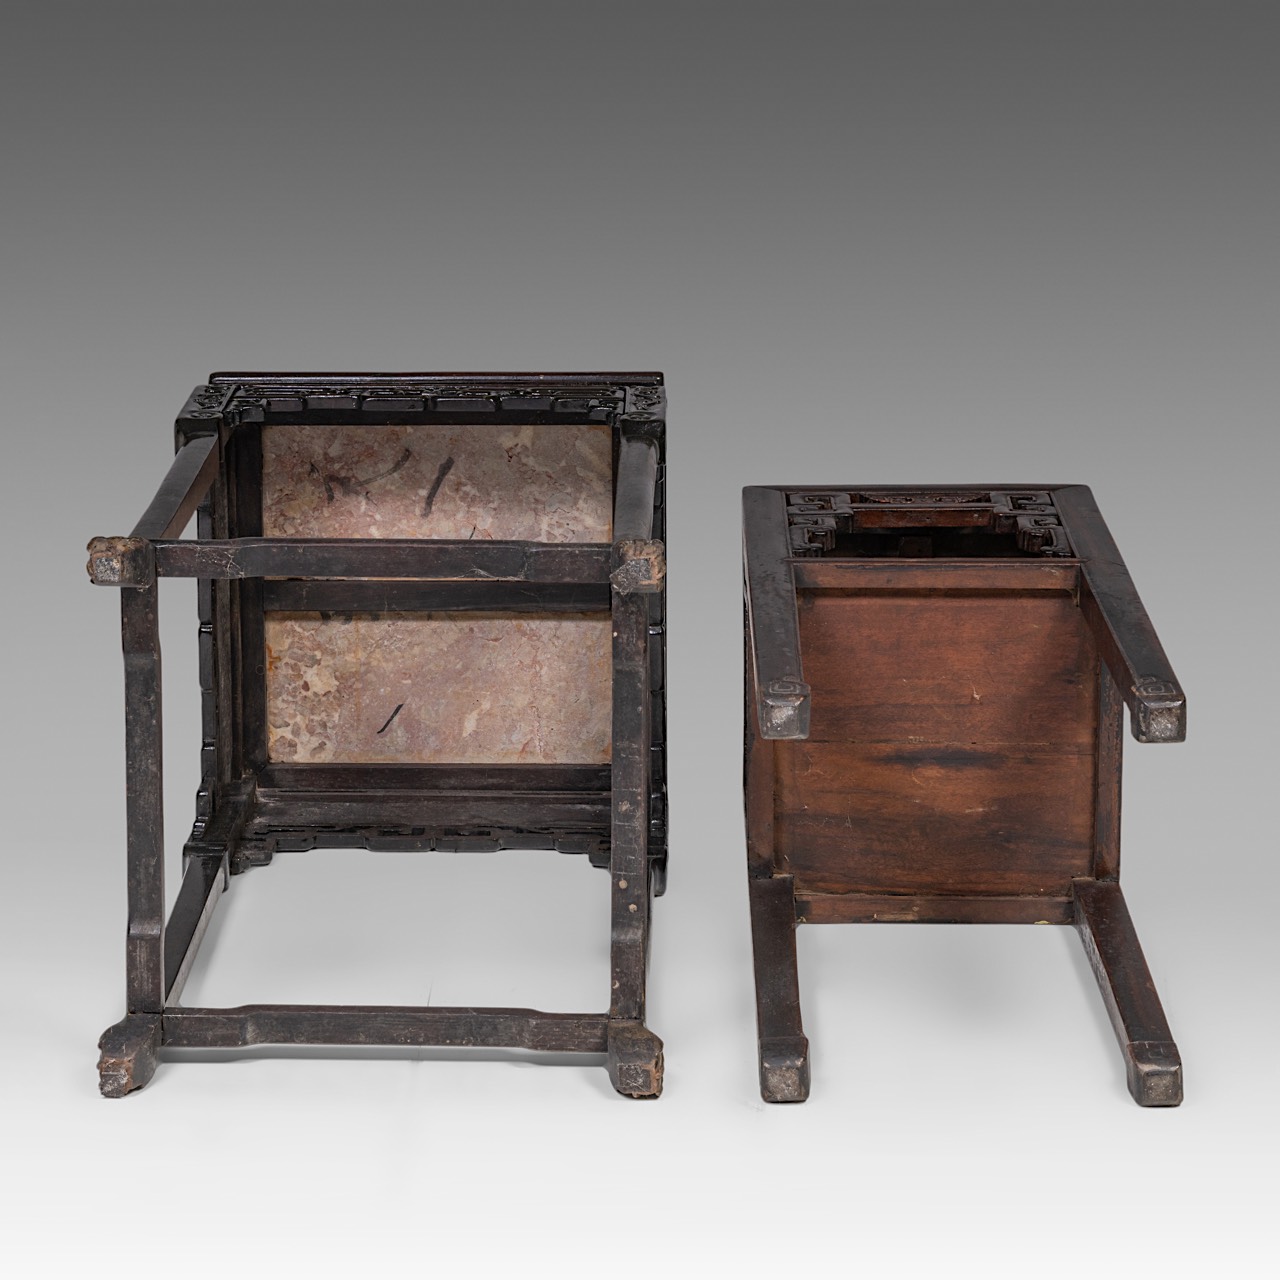 Two South-Chinese carved hardwood bases, one with a marble top, late Qing, largest H 82 - 48 x 48 cm - Image 7 of 7